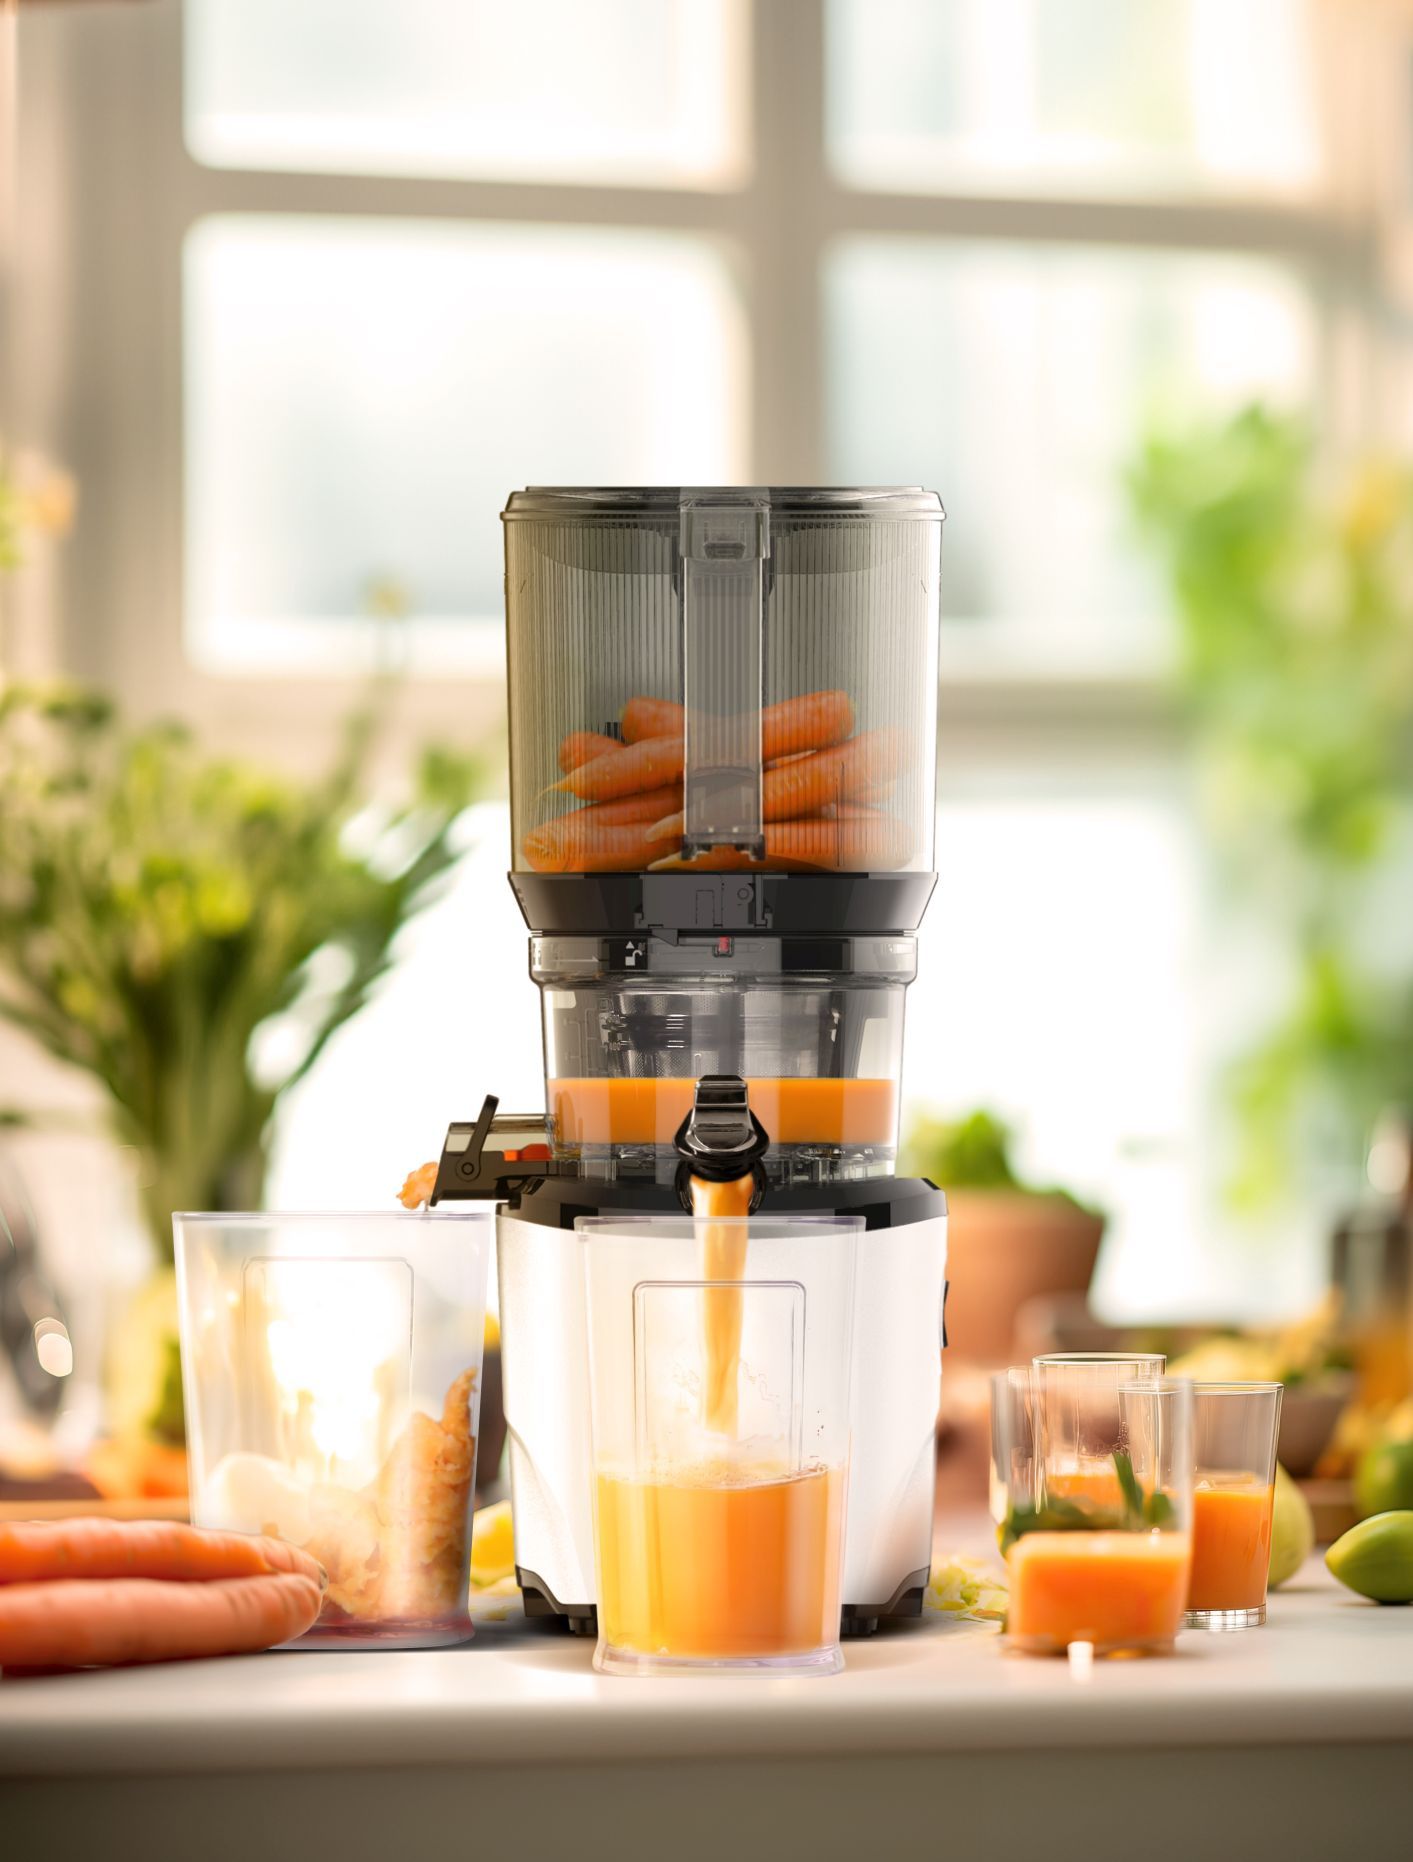 Kuvings AUTO 10 Hands-Free Slow Juicer